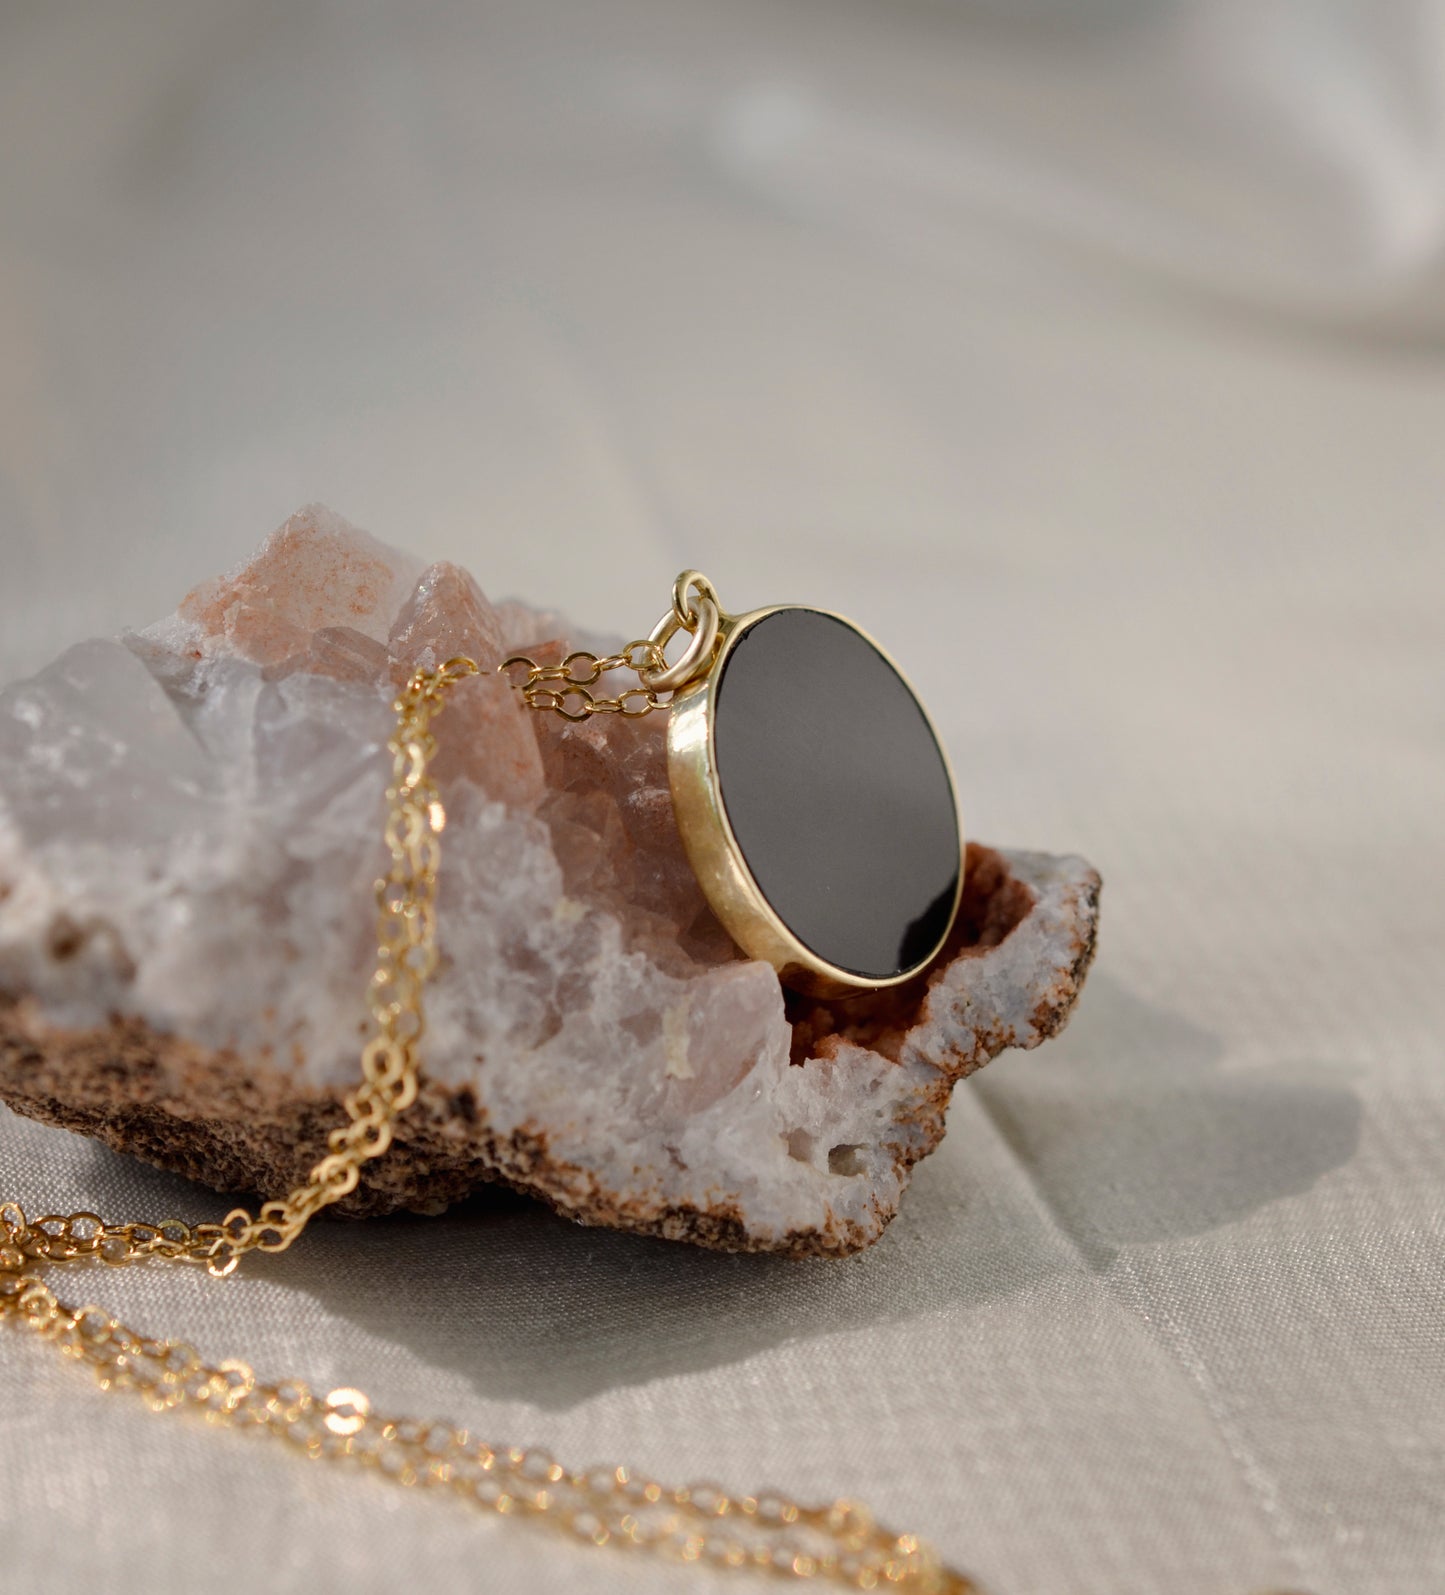 Smooth Polished Black Onyx Circle Pendant on Simple Gold Chain.